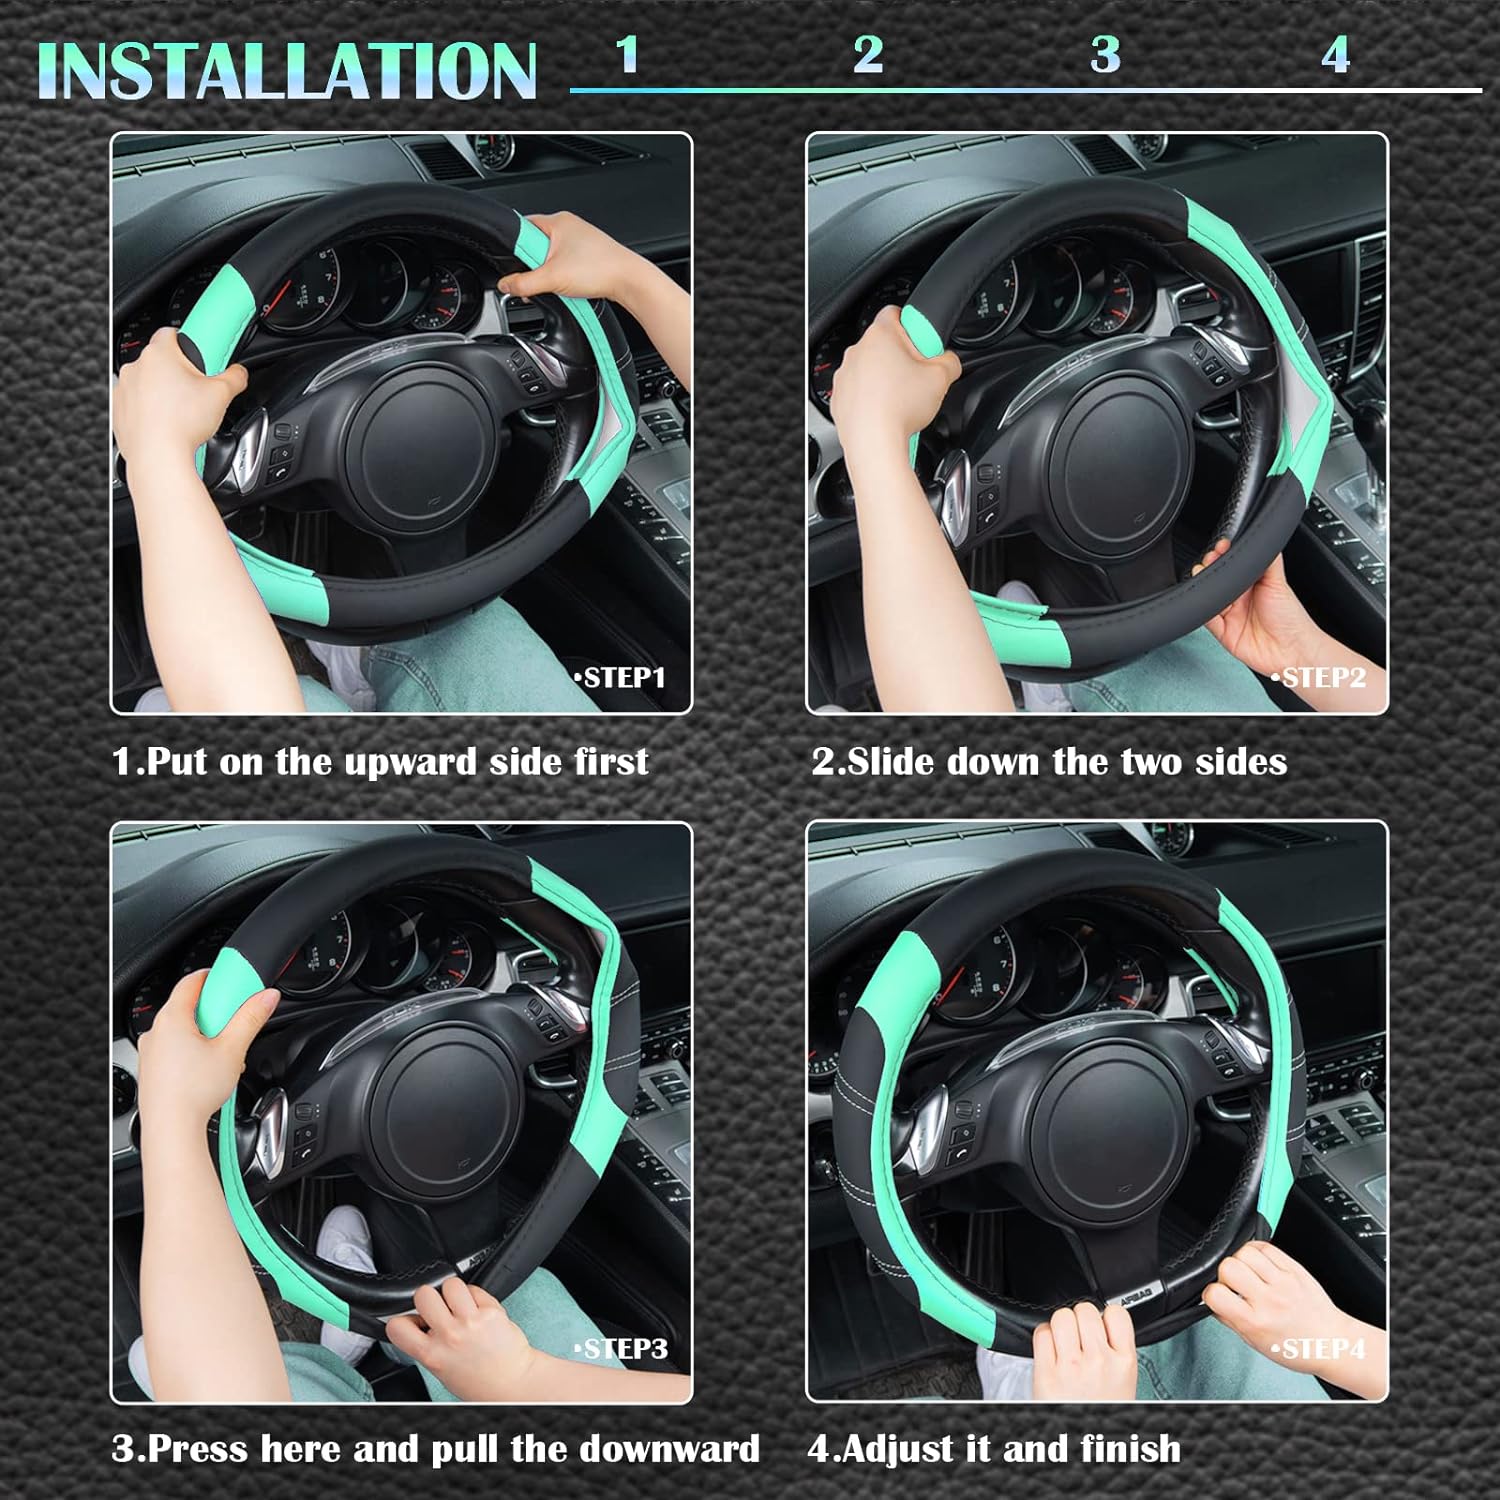 CAR PASS Line Rider Microfiber Leather Sporty Steering Wheel Cover and Sporty Cloth Full Set Car Seat Covers,Fits for 95% Truck,SUV,Cars, Anti-Slip Safety Comfortable Desgin (Black Mint Blue)